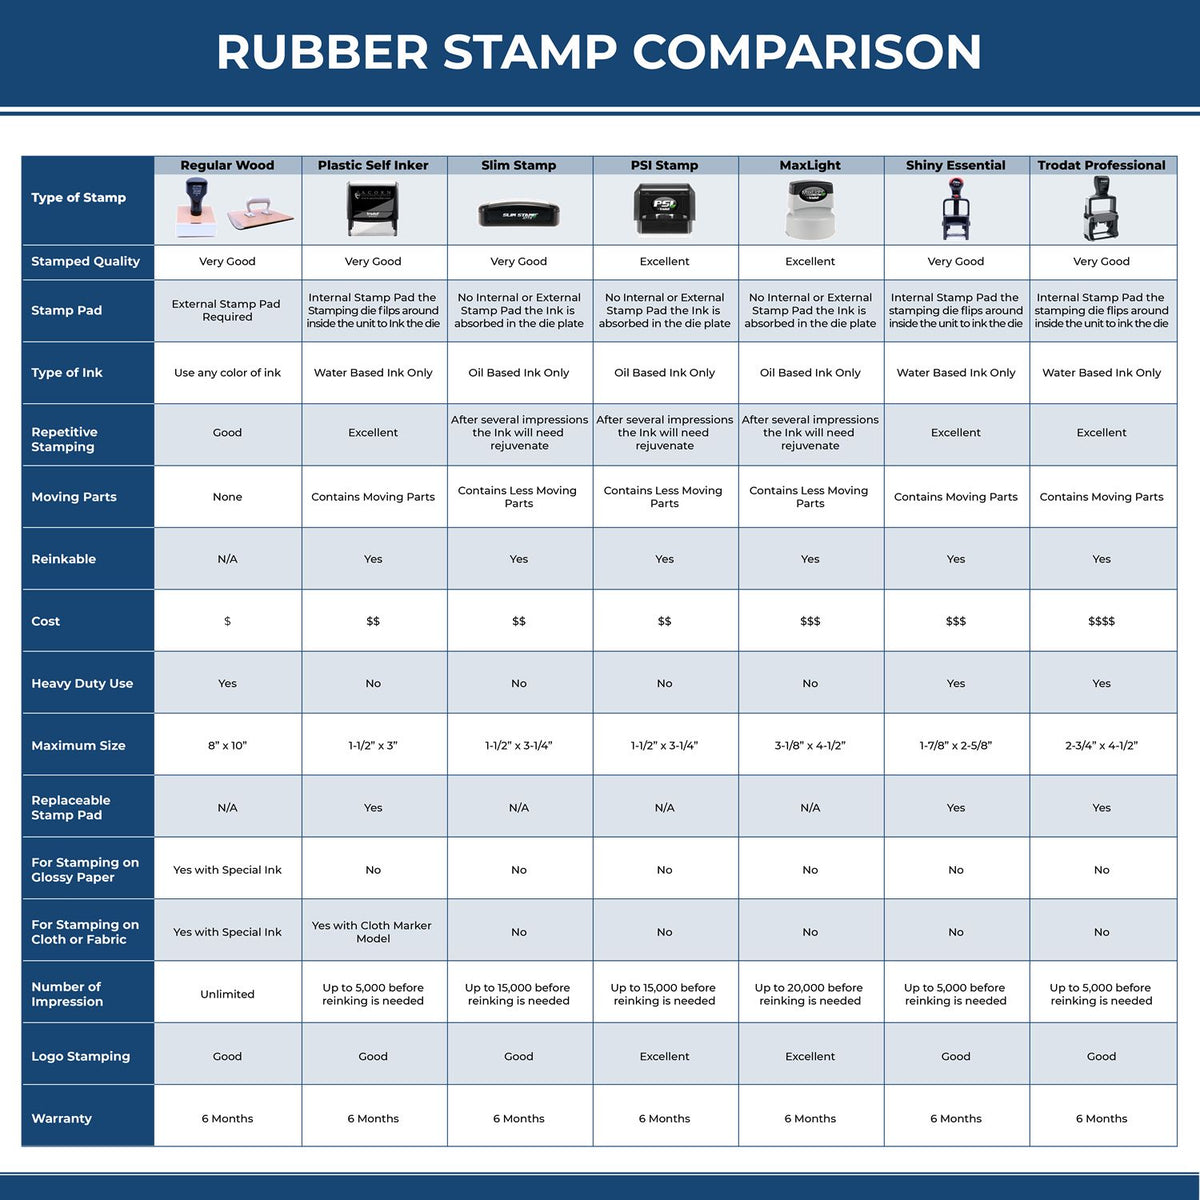 A comparison chart for the different types of mount models available for the Heavy-Duty Rhode Island Rectangular Notary Stamp.